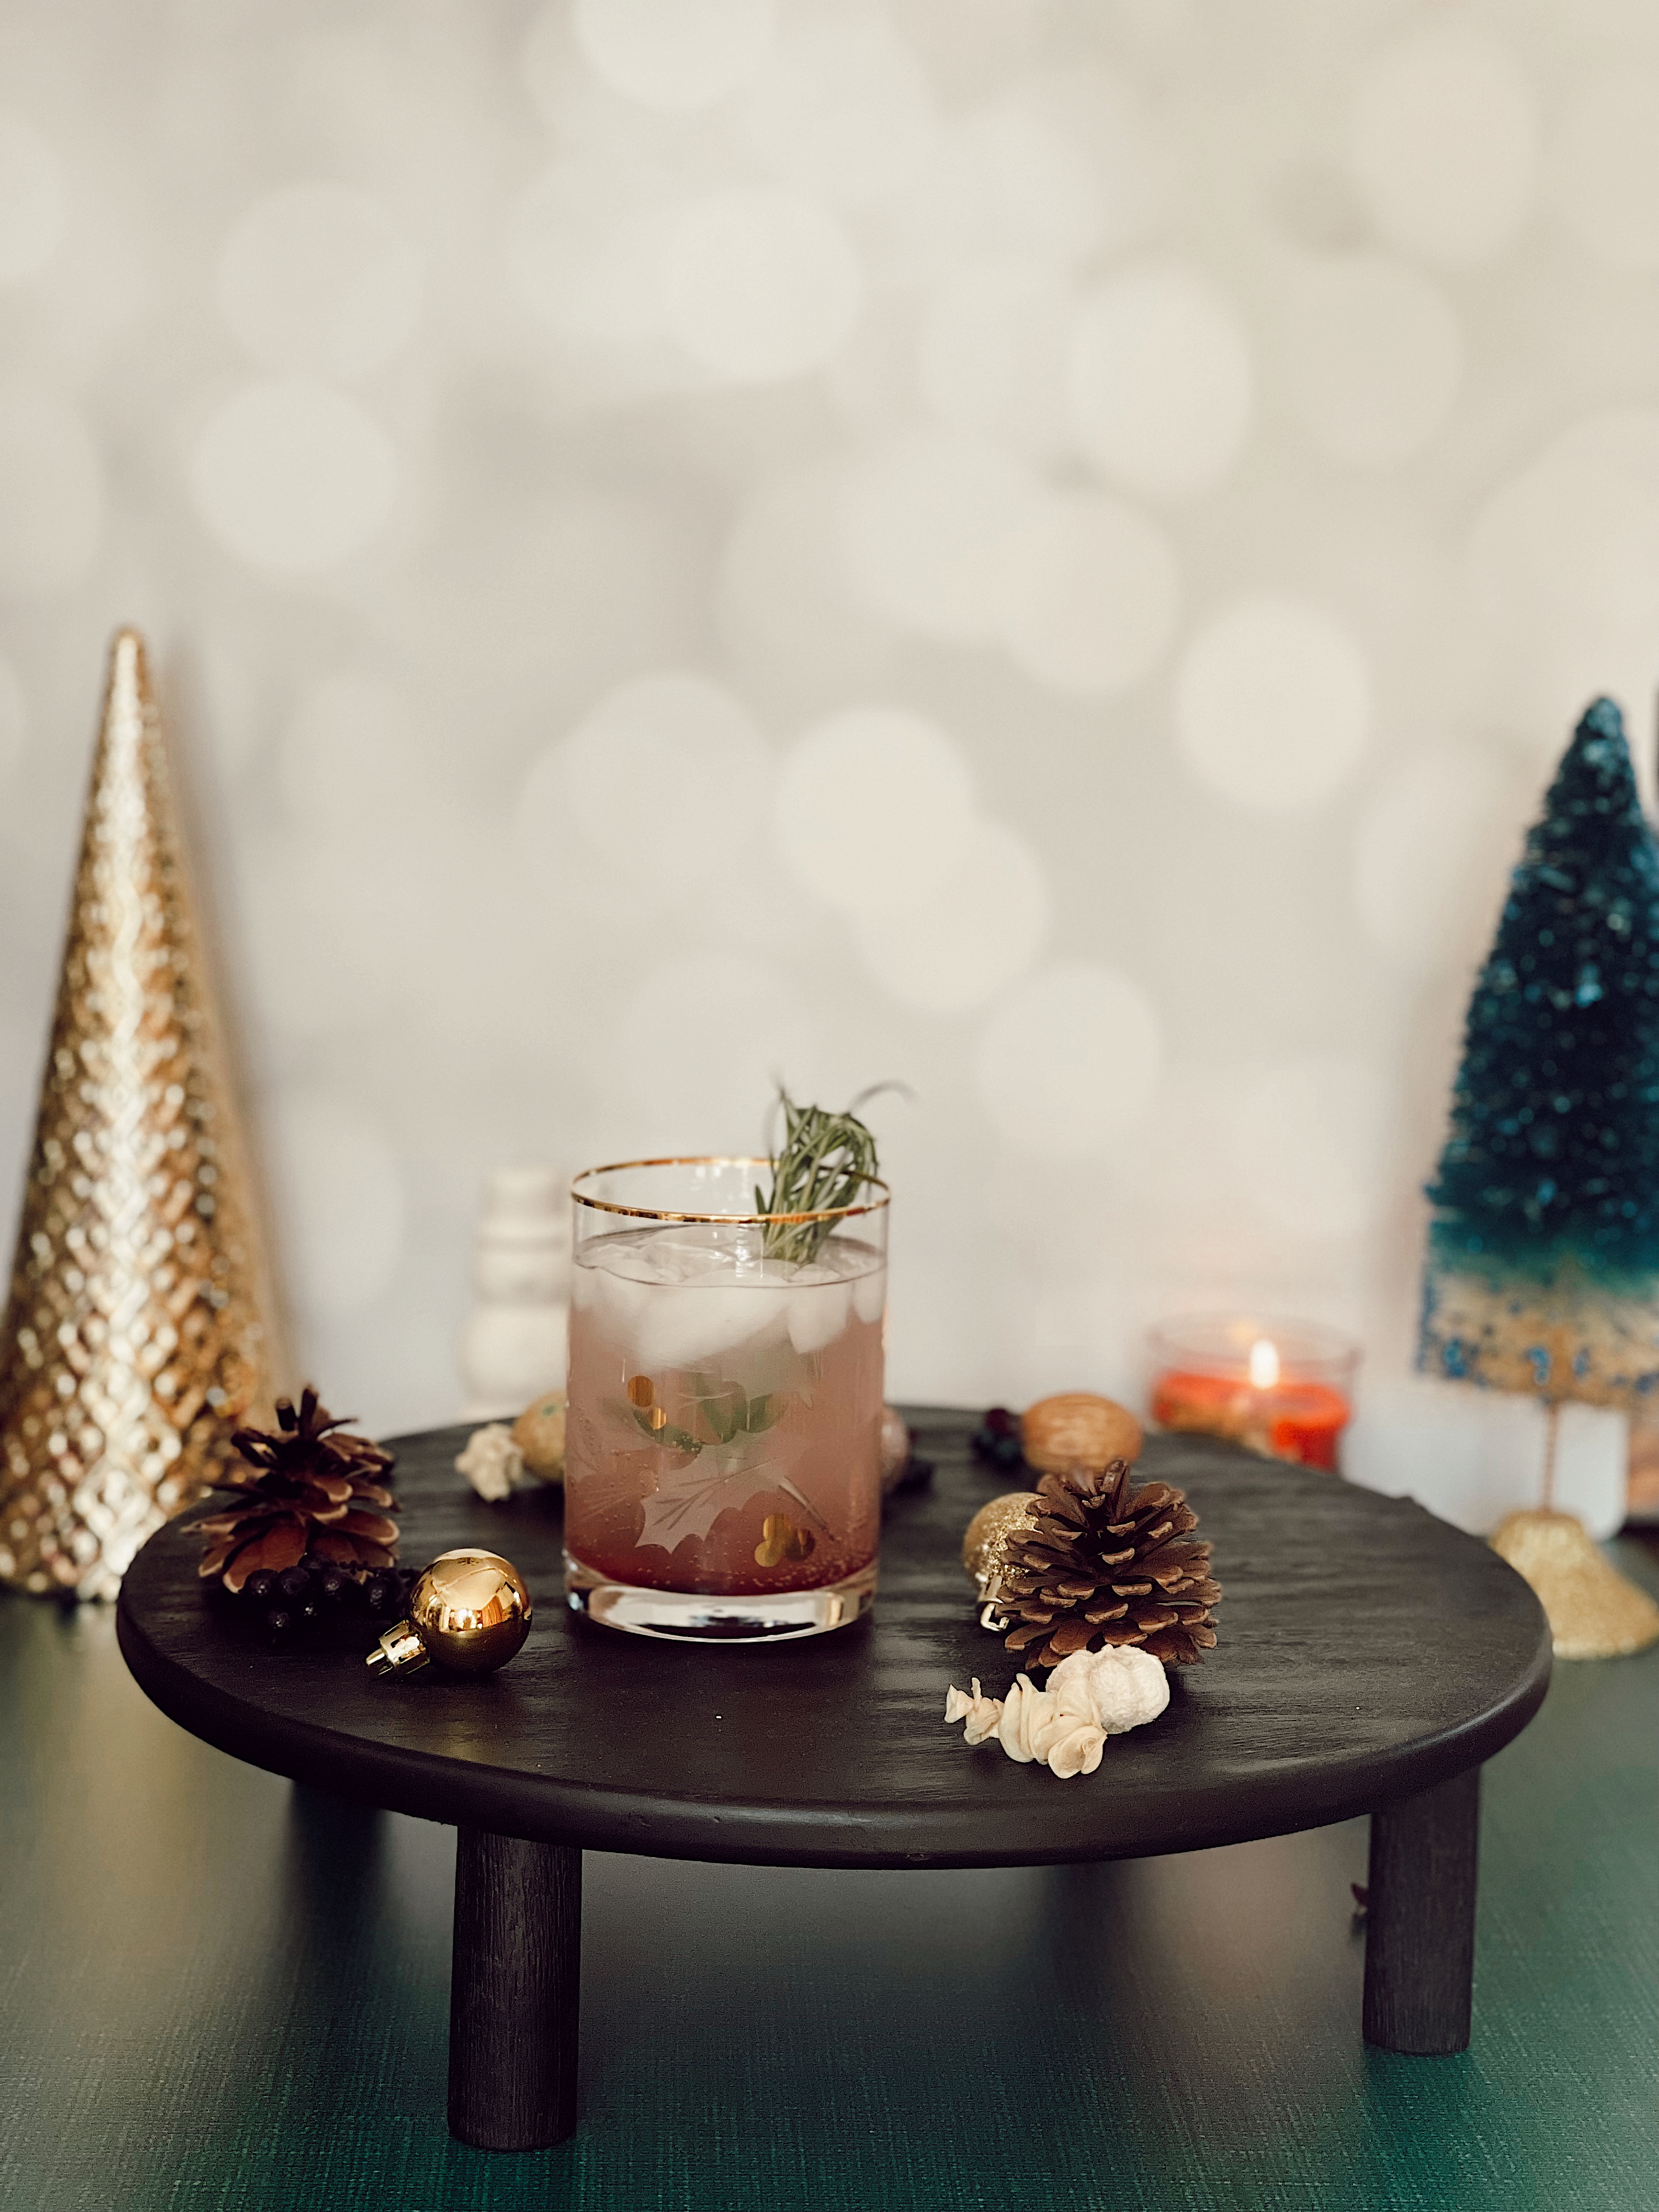 Top Nashville Lifestyle blogger, Nashville Wifestyles shares her Easy 3 Ingredient Holiday Cocktail, Rudolph's Ruby Nose Rhubarb Fizz!